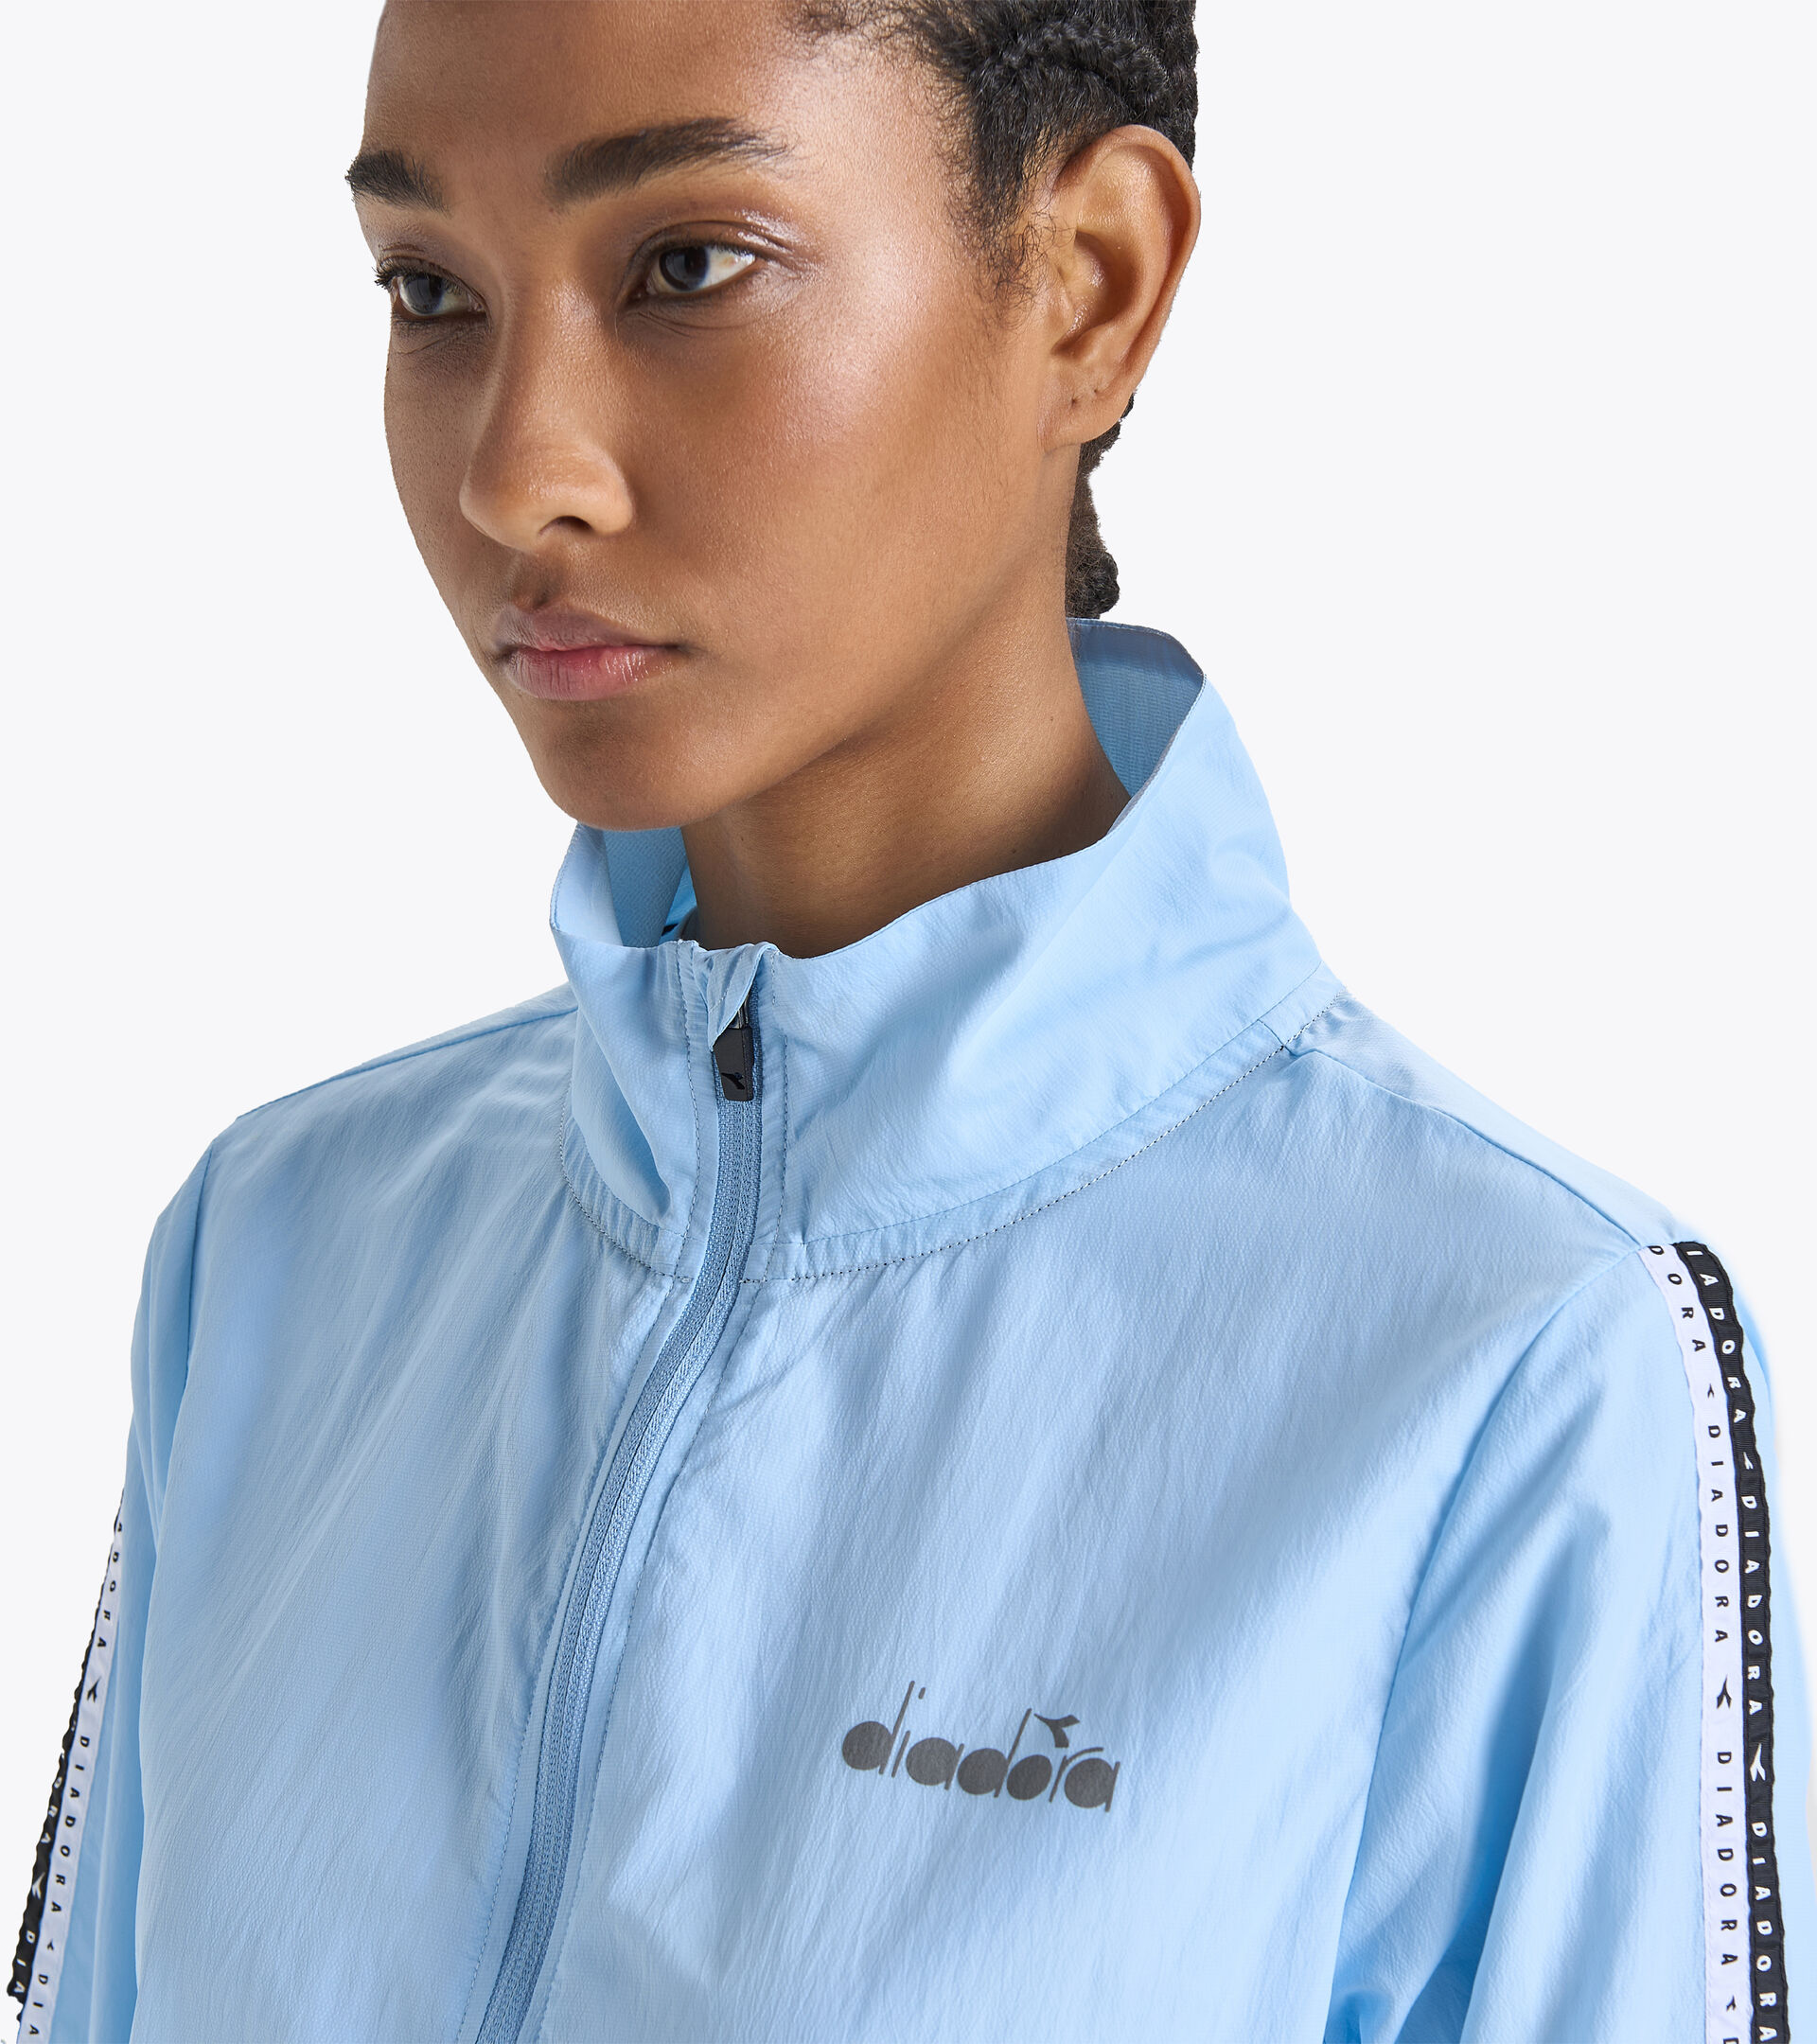 Running windproof jacket - Women  L. MULTILAYER JACKET BE ONE BRIGHT BABY BLUE - Diadora